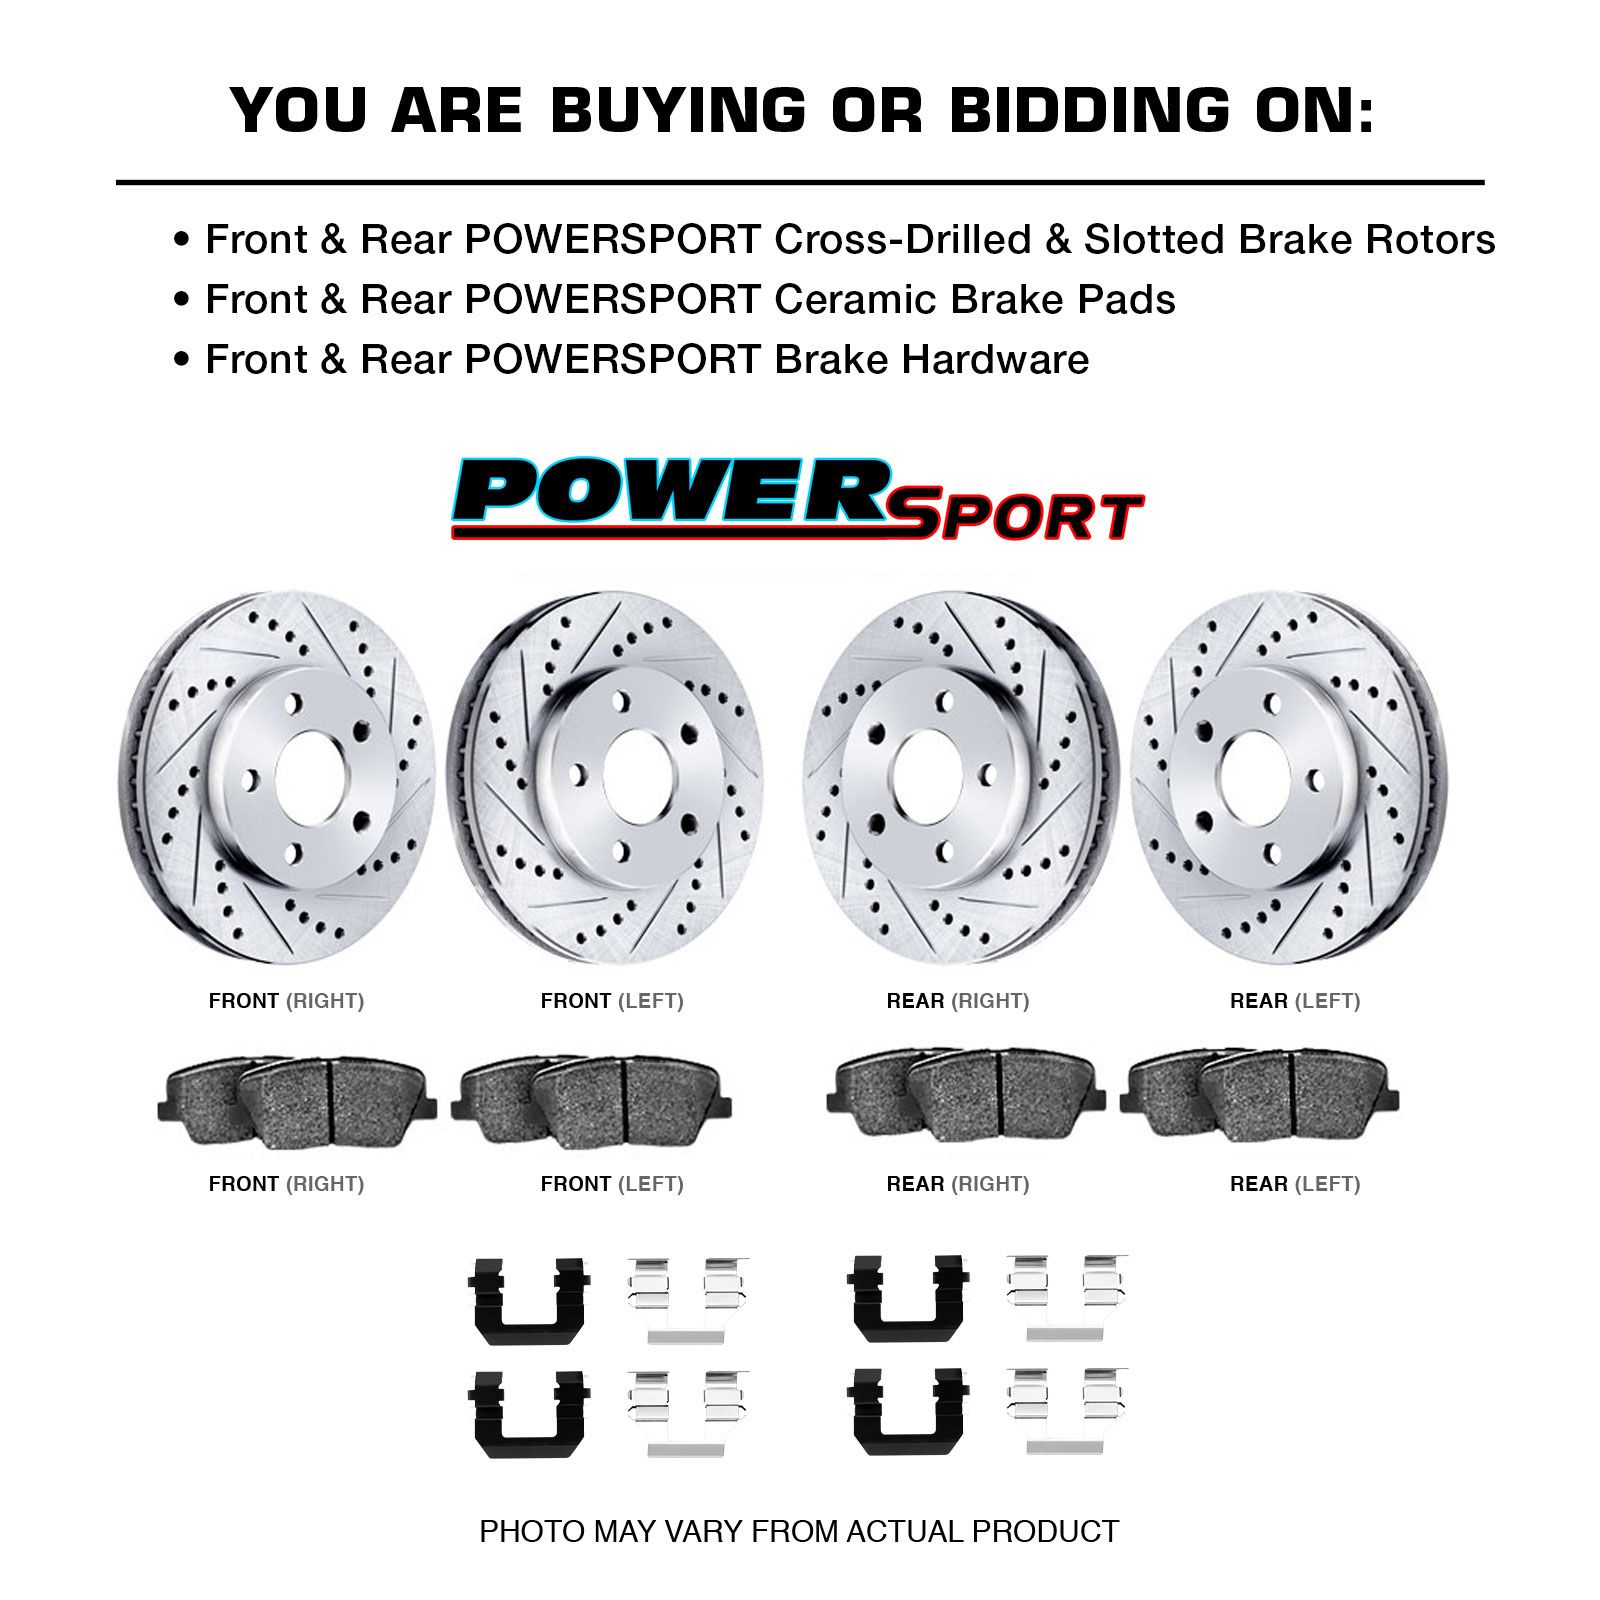 FRONTS Power Sport Cross Drilled Slotted Brake Rotors and Ceramic Brake Pads Kit 81558 